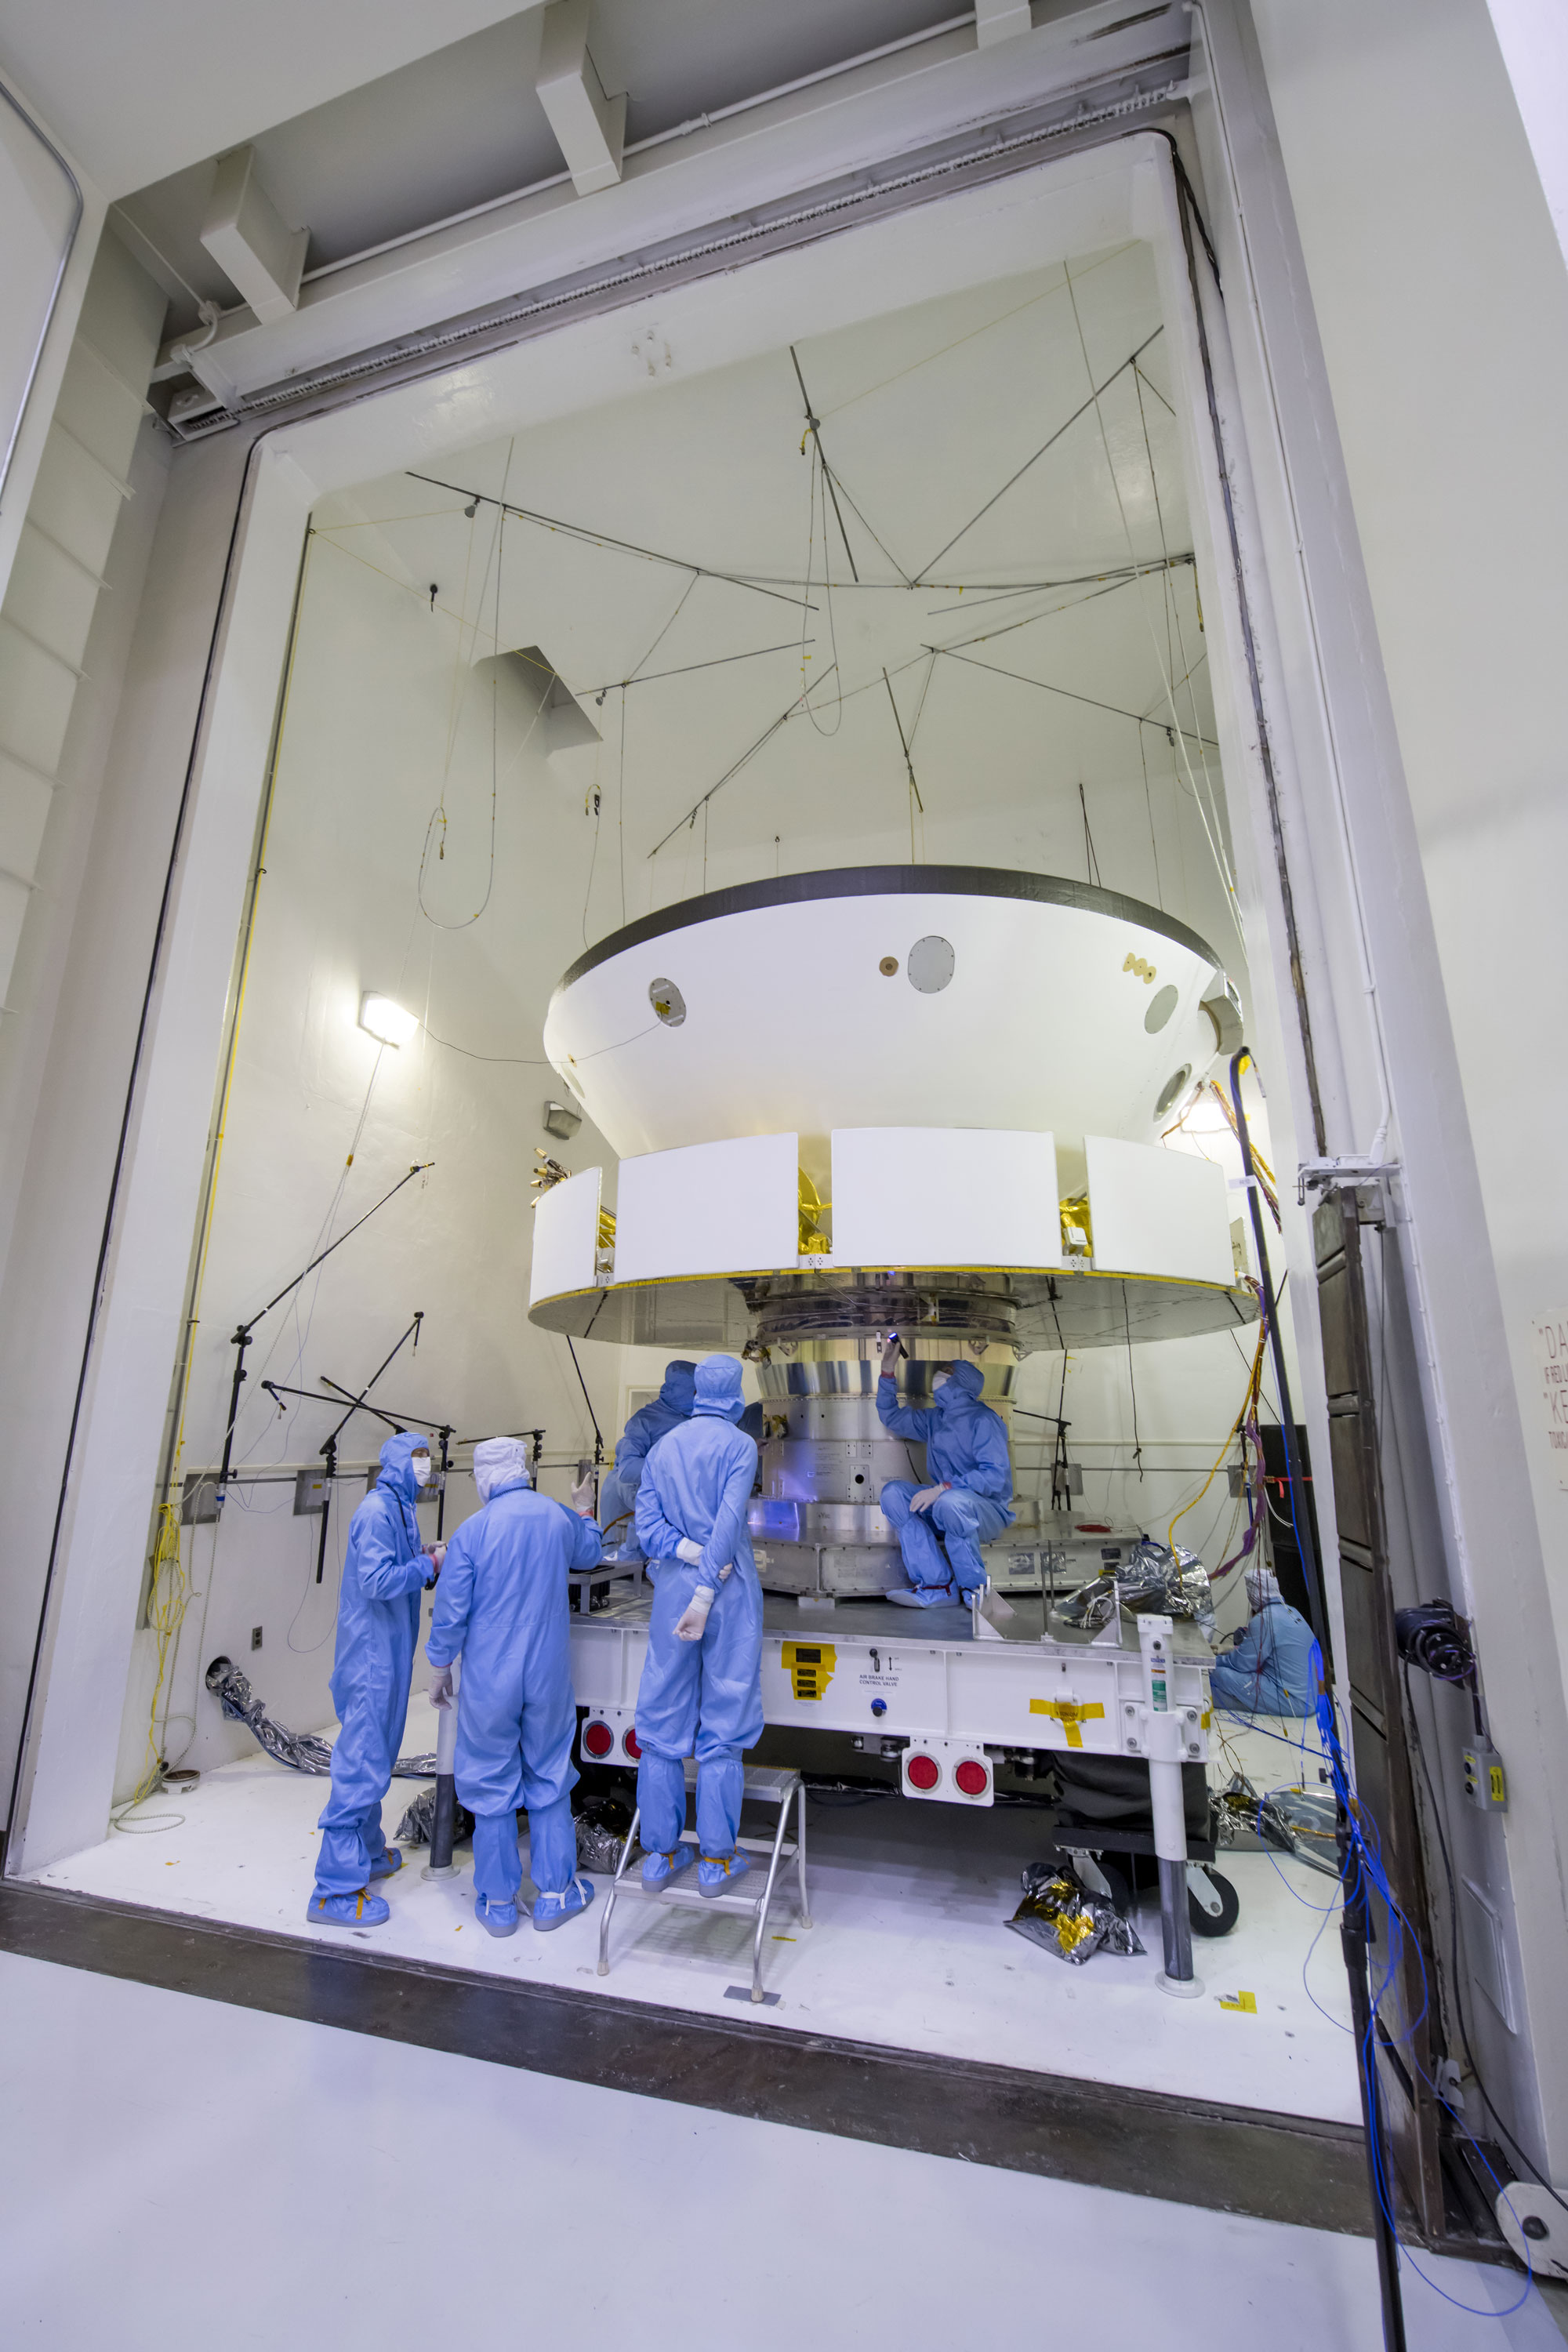 Engineers and technicians working on NASA's Mars 2020 mission prepare spacecraft components for acoustic testing in the Environmental Test Facility at NASA's Jet Propulsion Laboratory in Pasadena, California.